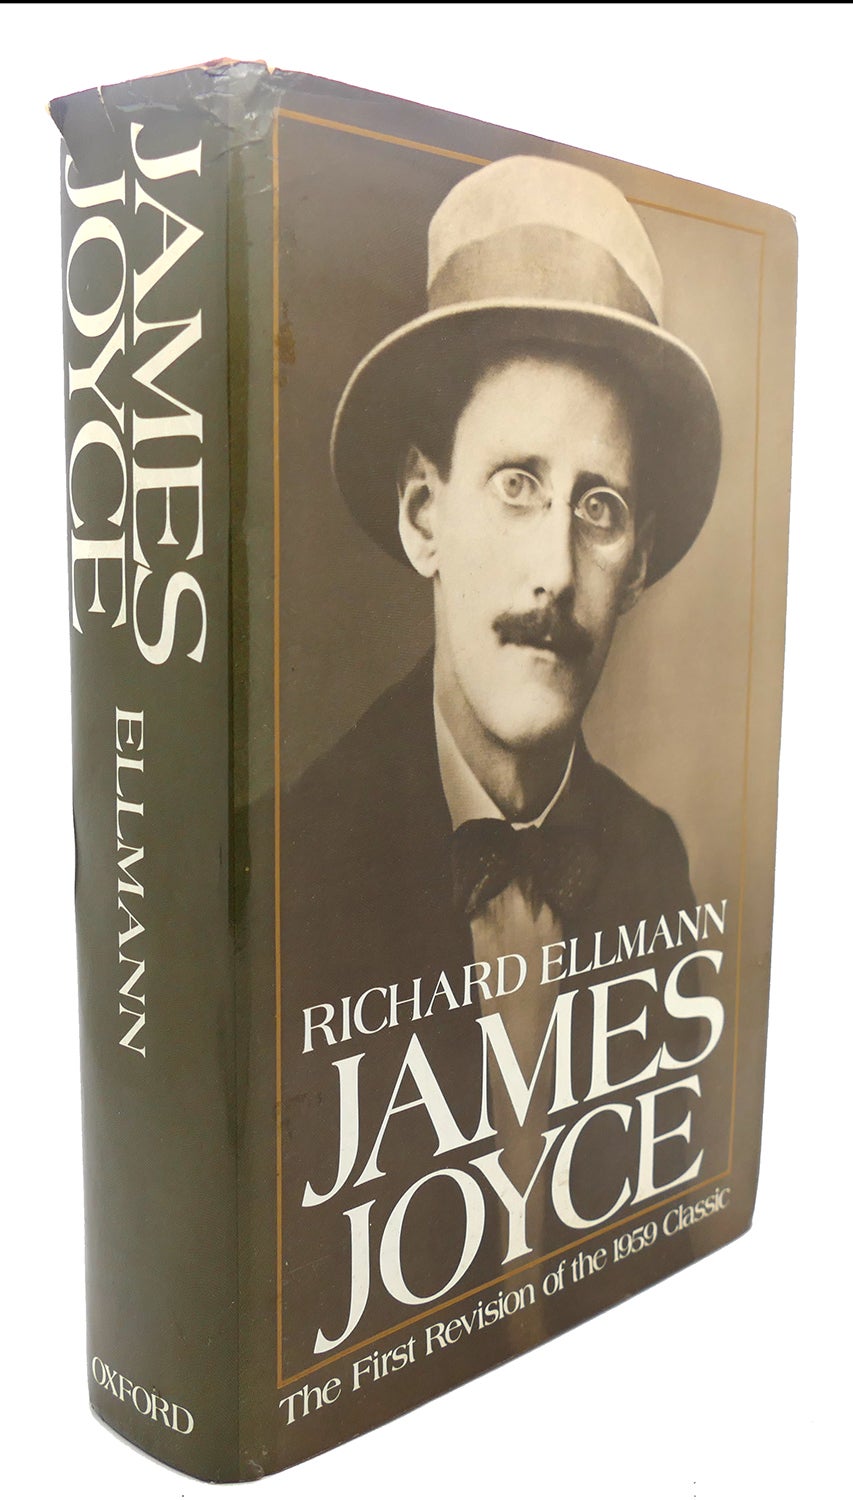 JAMES JOYCE : New and Revised Edition | Richard Ellmann | First